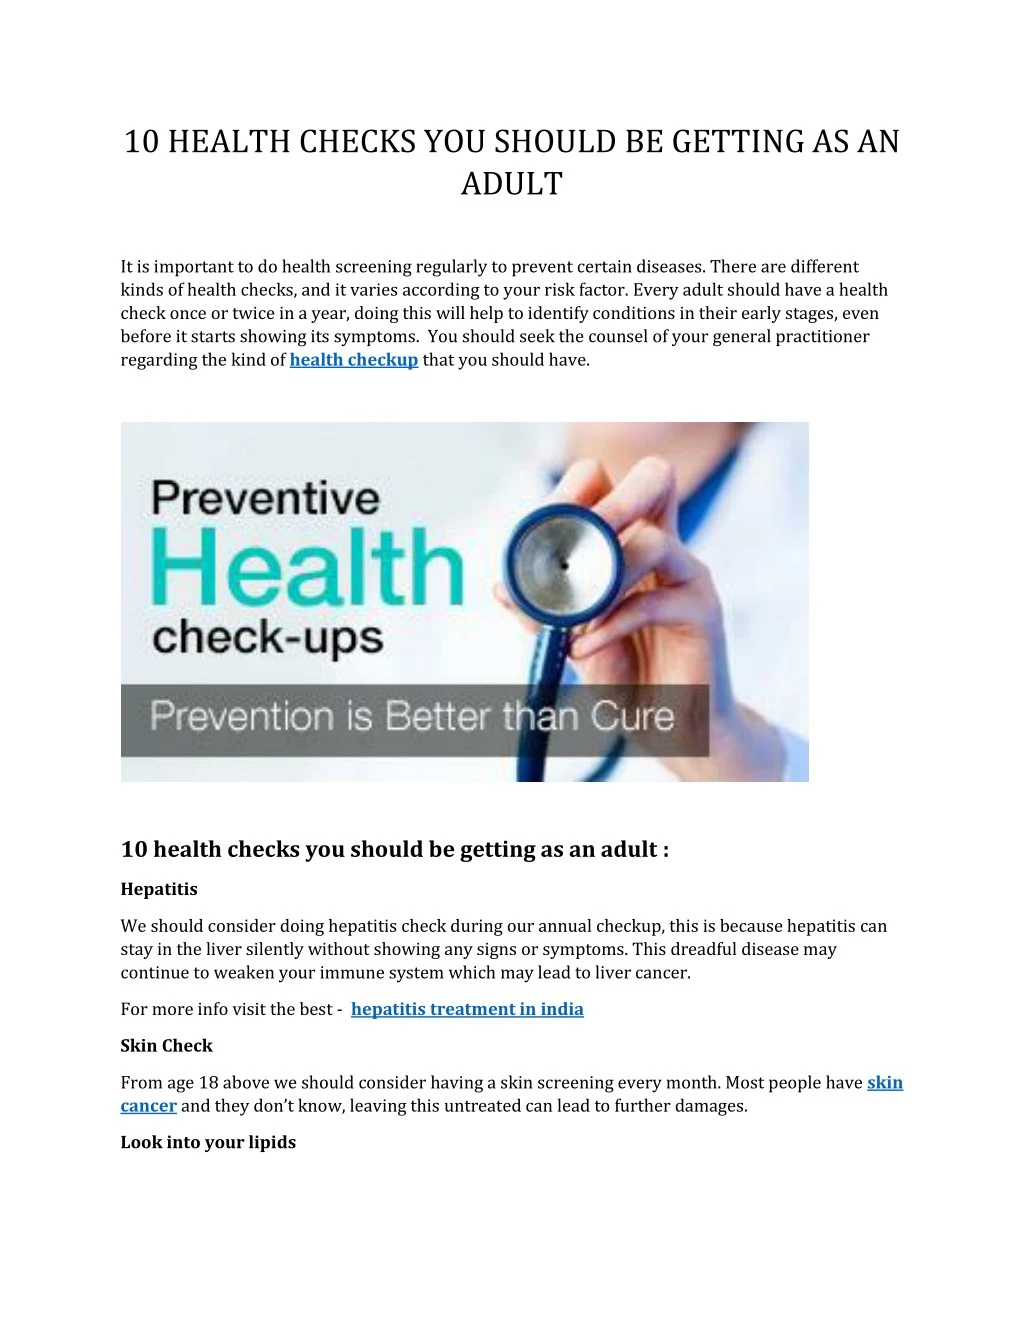 10 health checks you should be getting as an adult